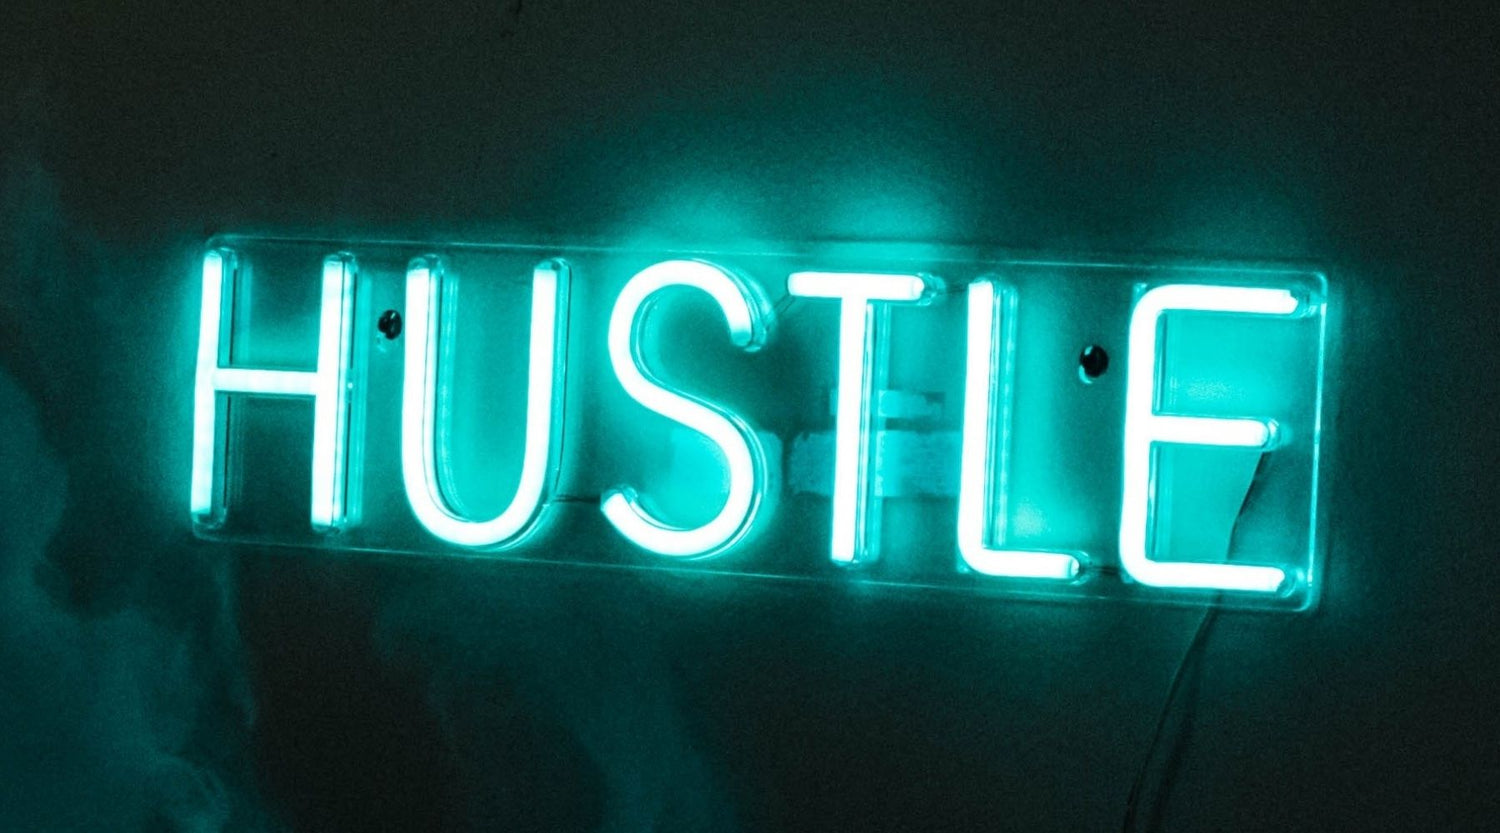 Custom Neon Signs for Gyms and Fitness Studios: Tips and Ideas